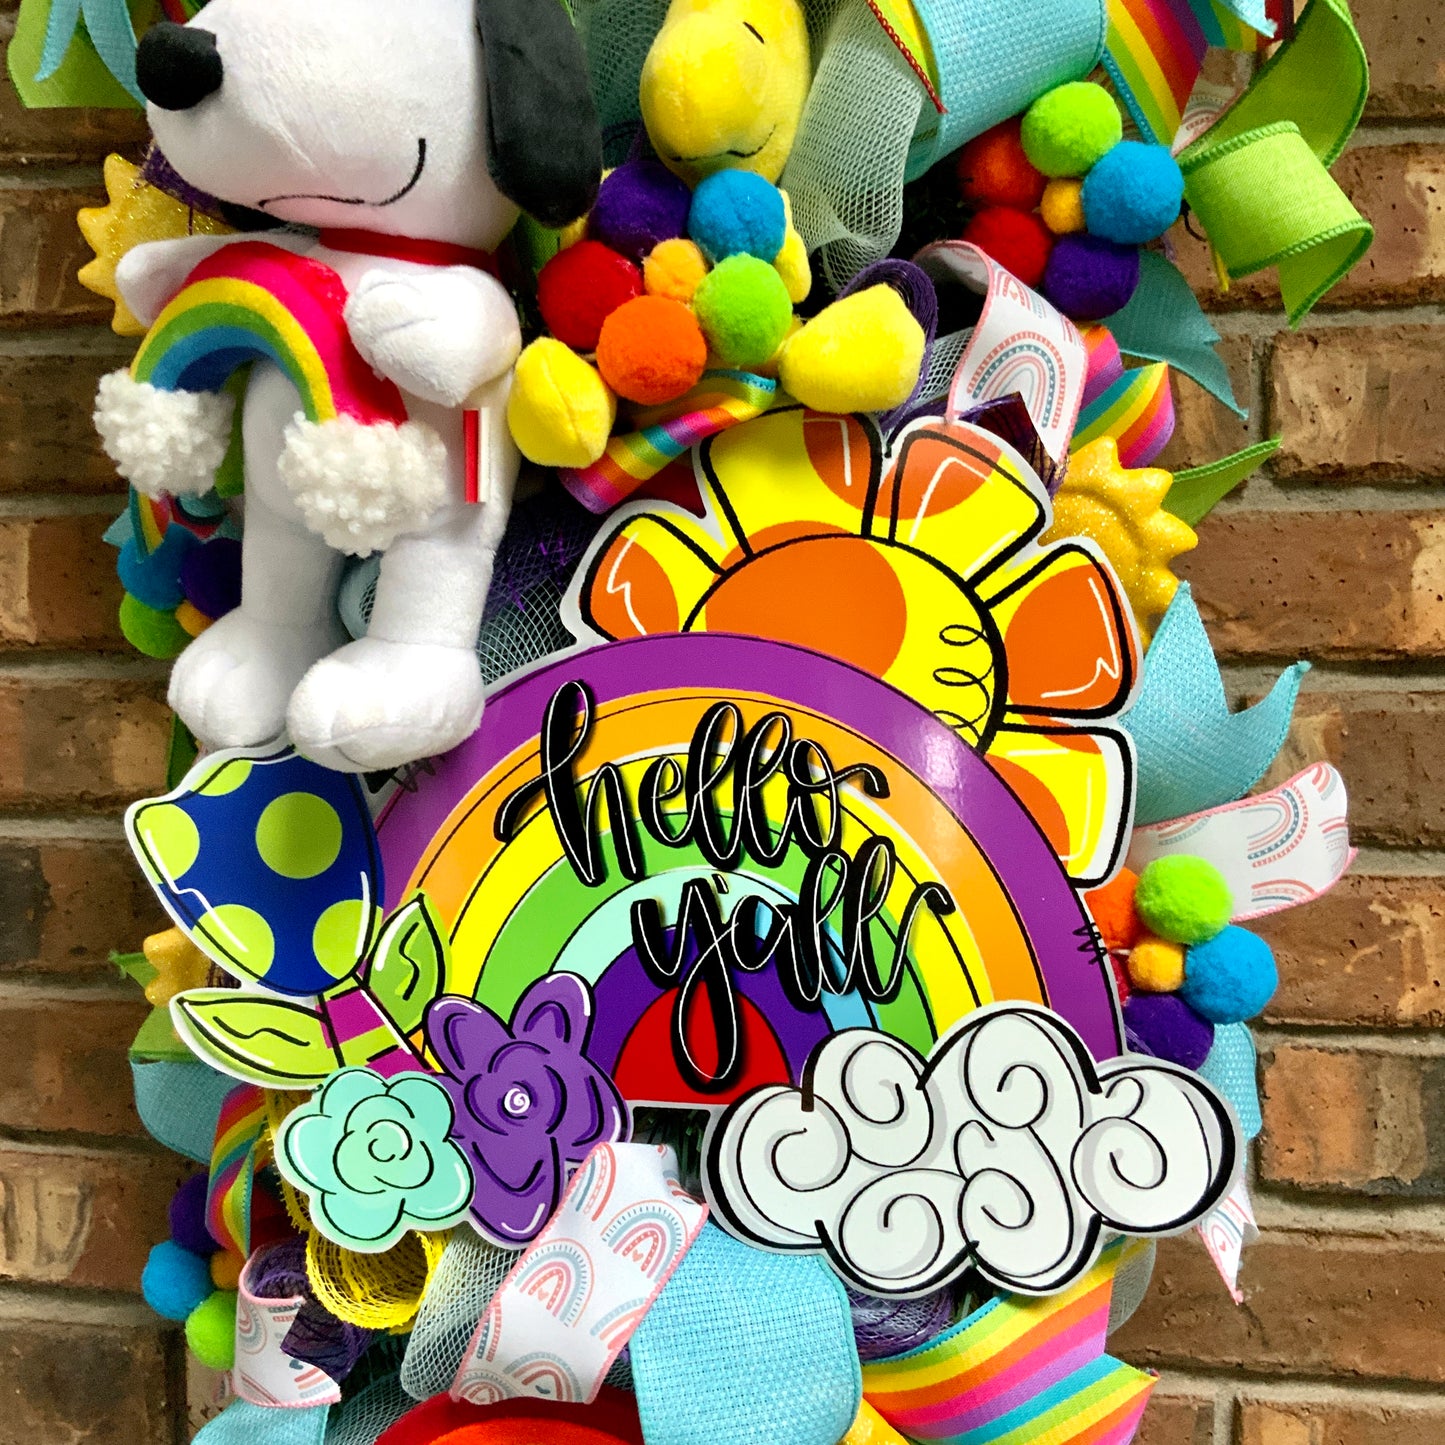 Snoopy Summer Wreath, Snoopy and Woodstock Decor, Summer Snoopy Door Hanger, Snoopy Swag, Colorful Summer Wreath, Rainbow Summer Wreath For Front Door